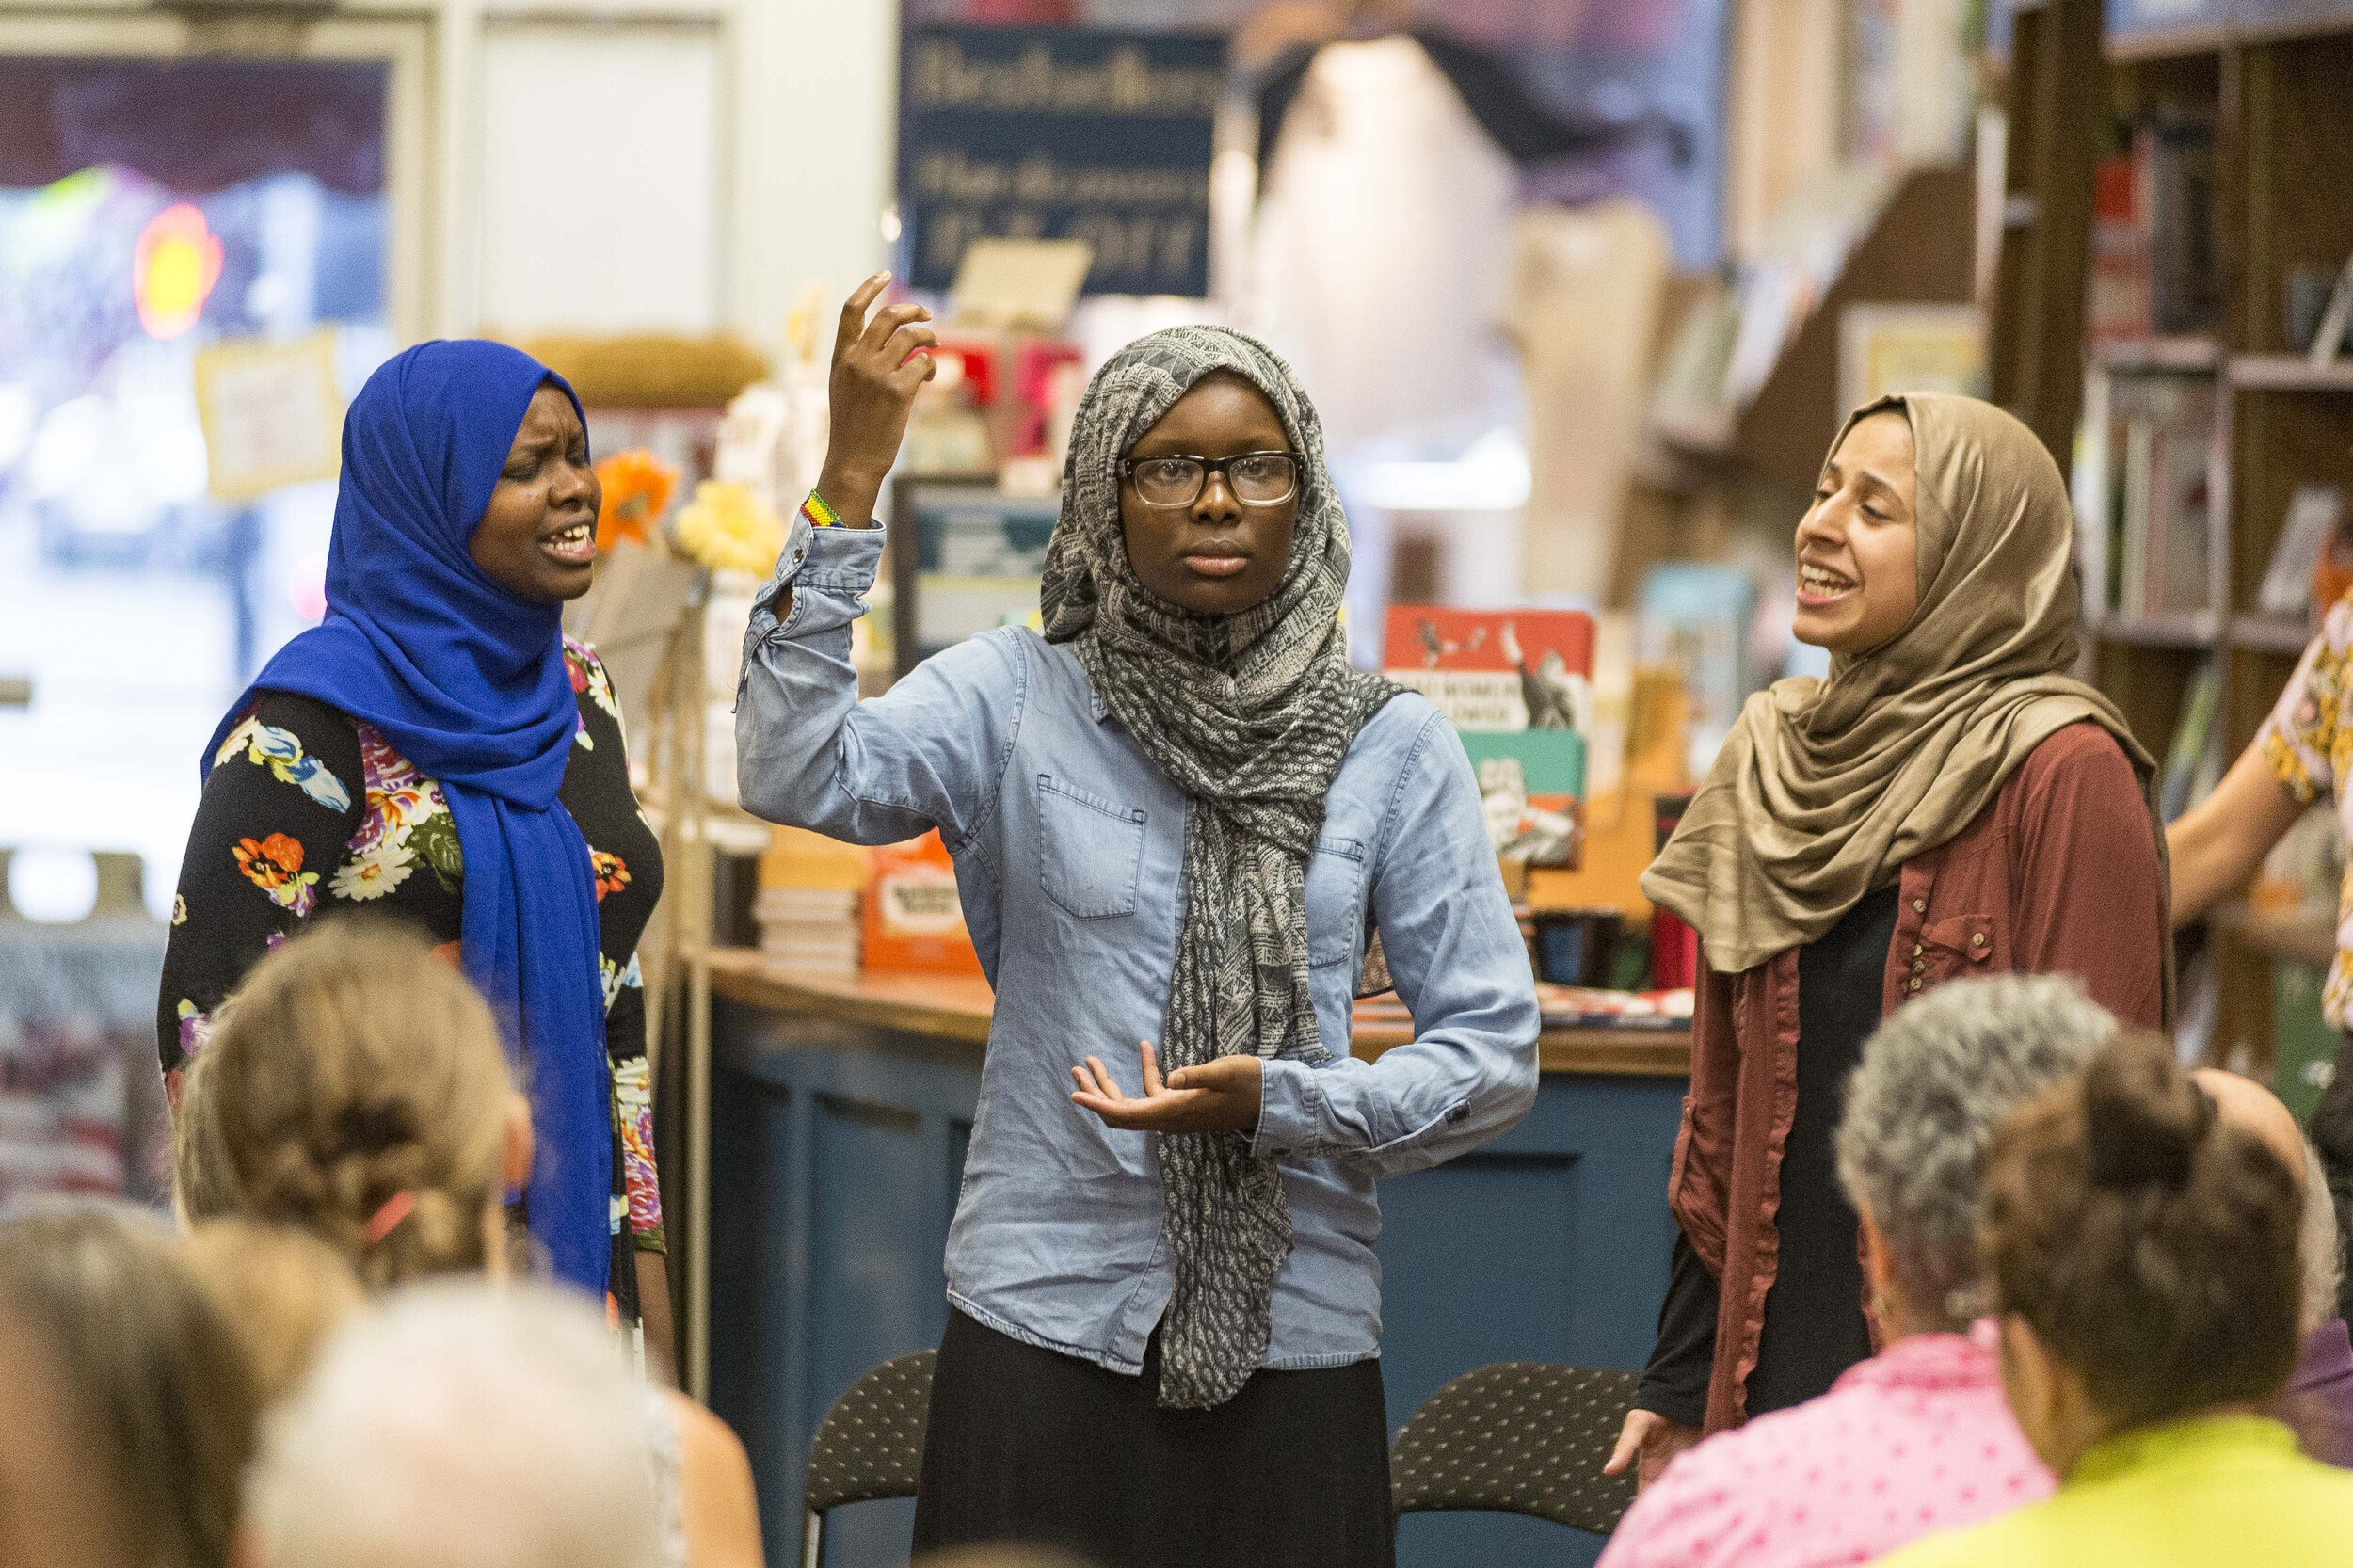  Haha Adam, Balkisa Omar, and Lena Ginawi of Muslim Girls for Change perform "Wake Up, America," a slam poetry piece about the Syrian Refugee crisis, during an event at Bear Pond Books in Montpelier, VT on Tuesday, August 7th 2018.     